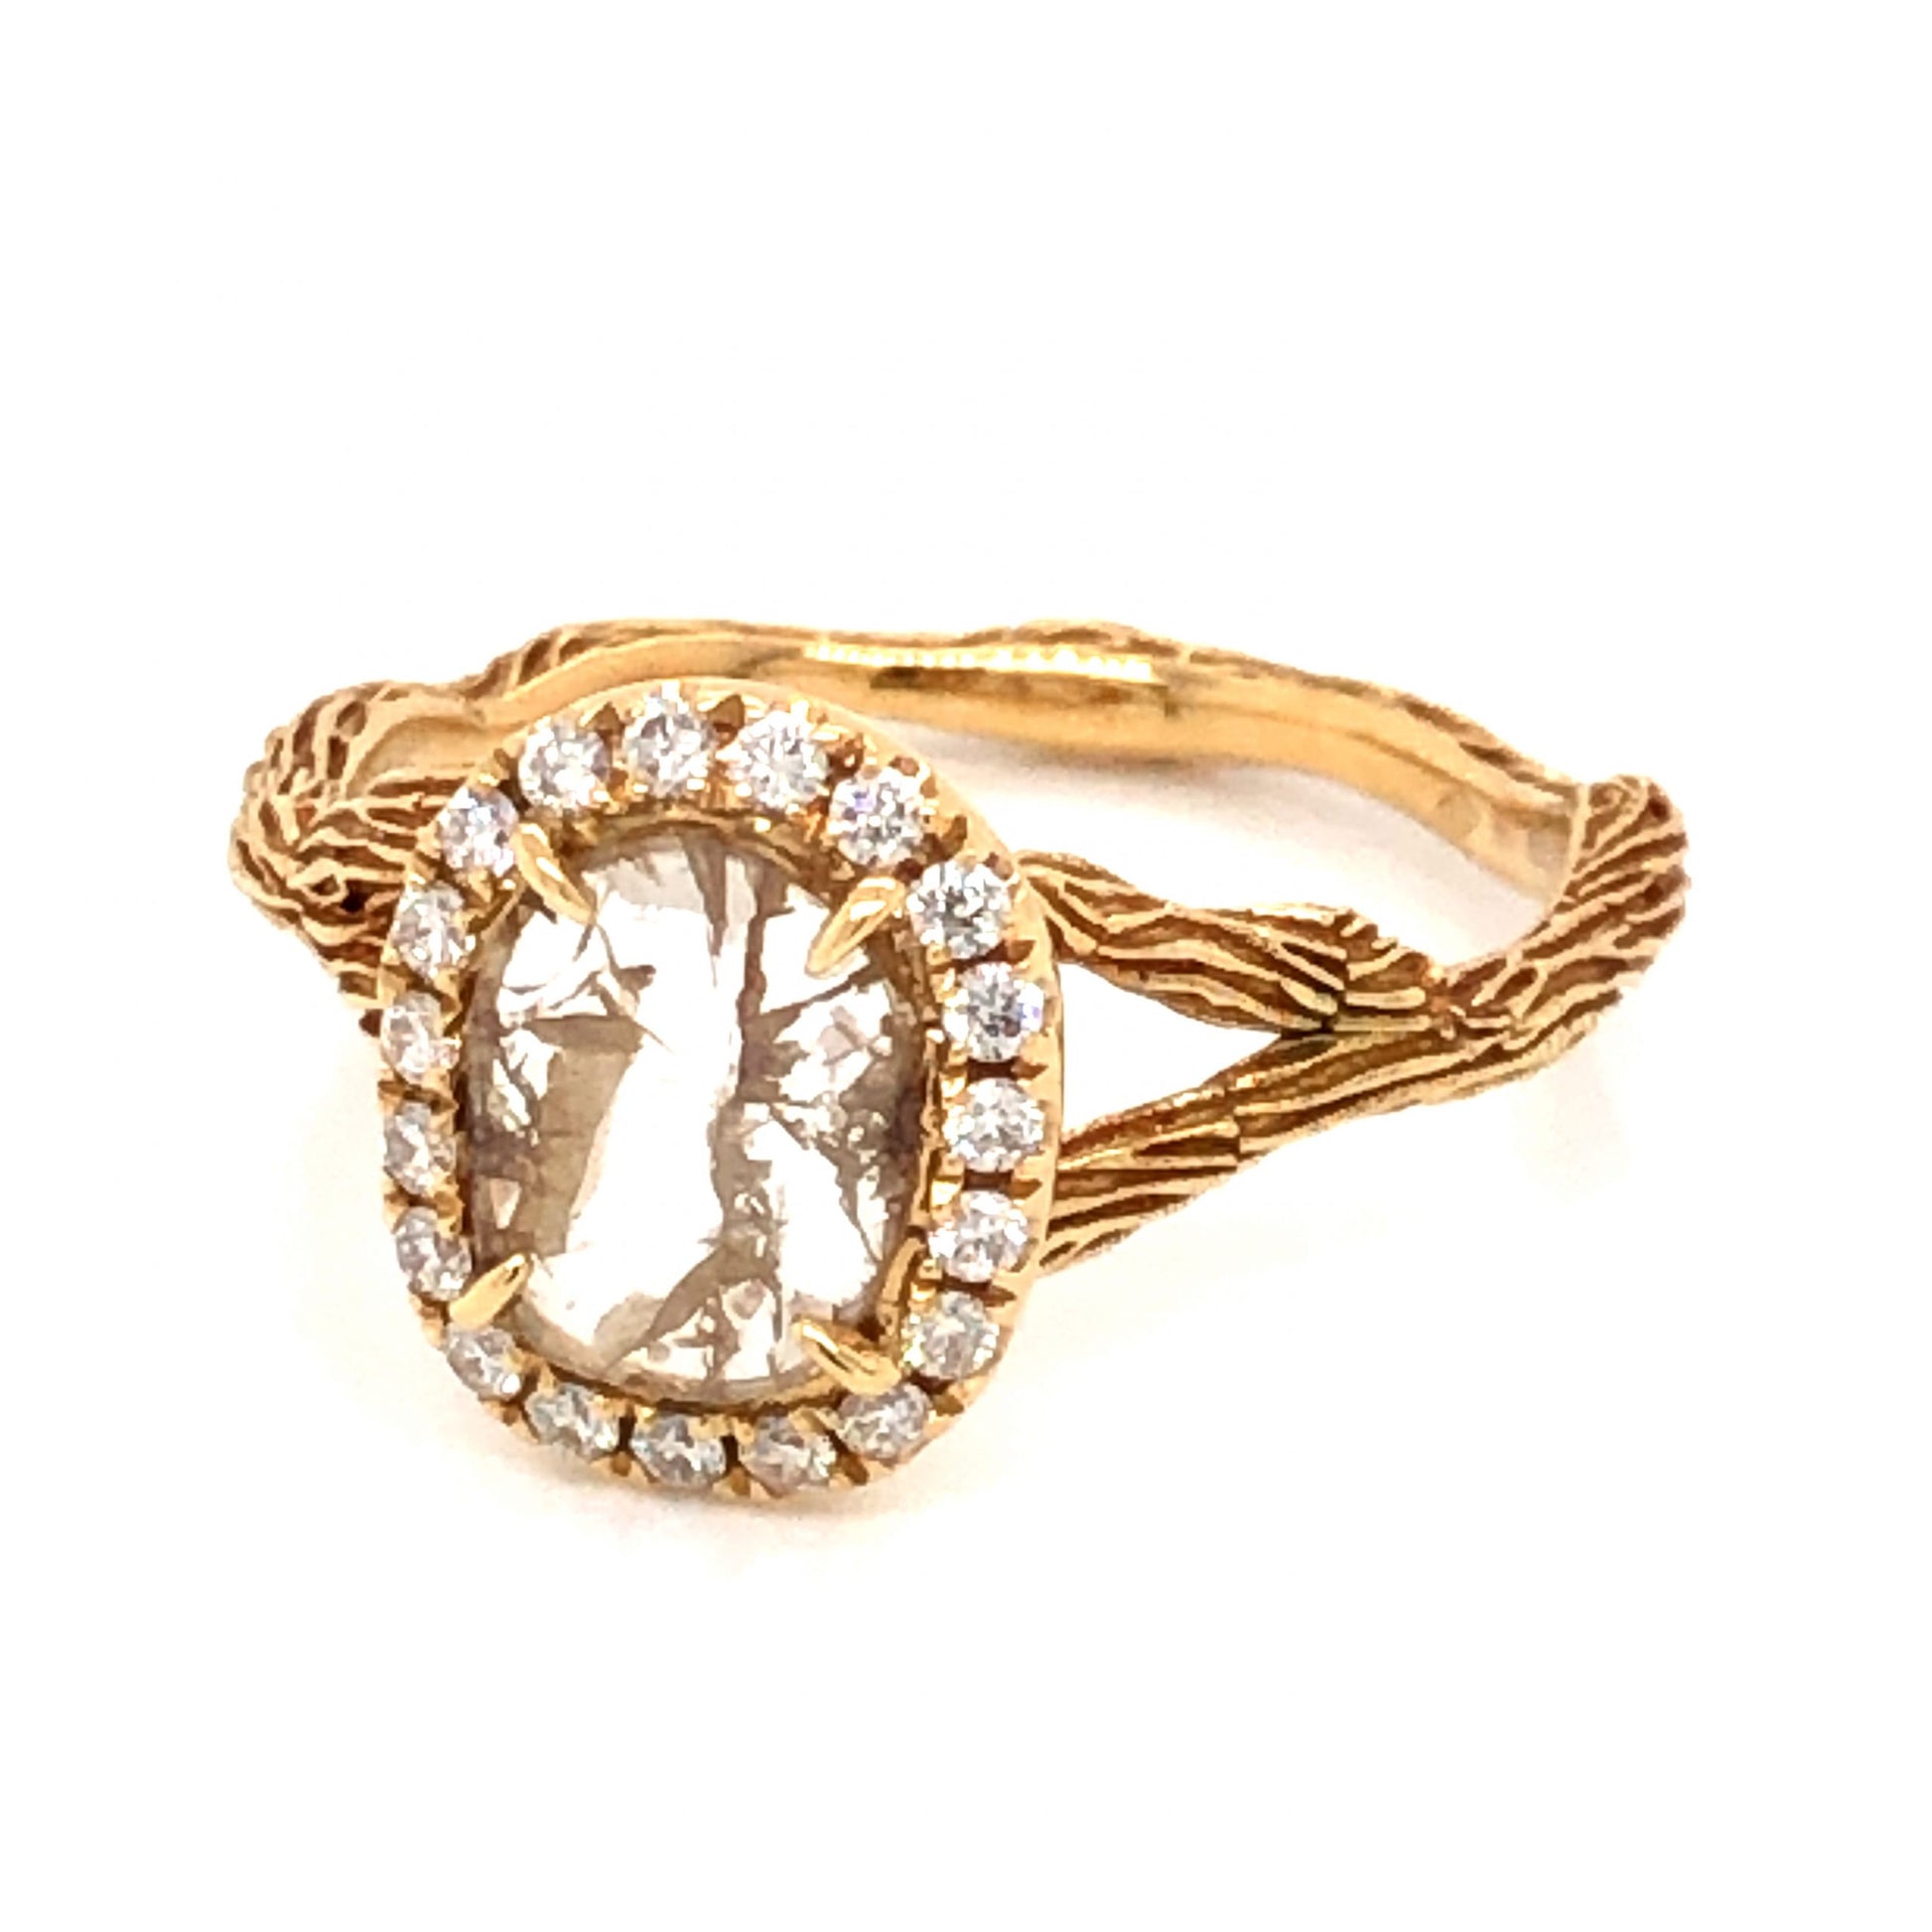 .39 Rose Cut Diamond Engagement Ring in 18K Yellow GoldComposition: PlatinumRing Size: 6.75Total Diamond Weight: .57 ctTotal Gram Weight: 2.9 g